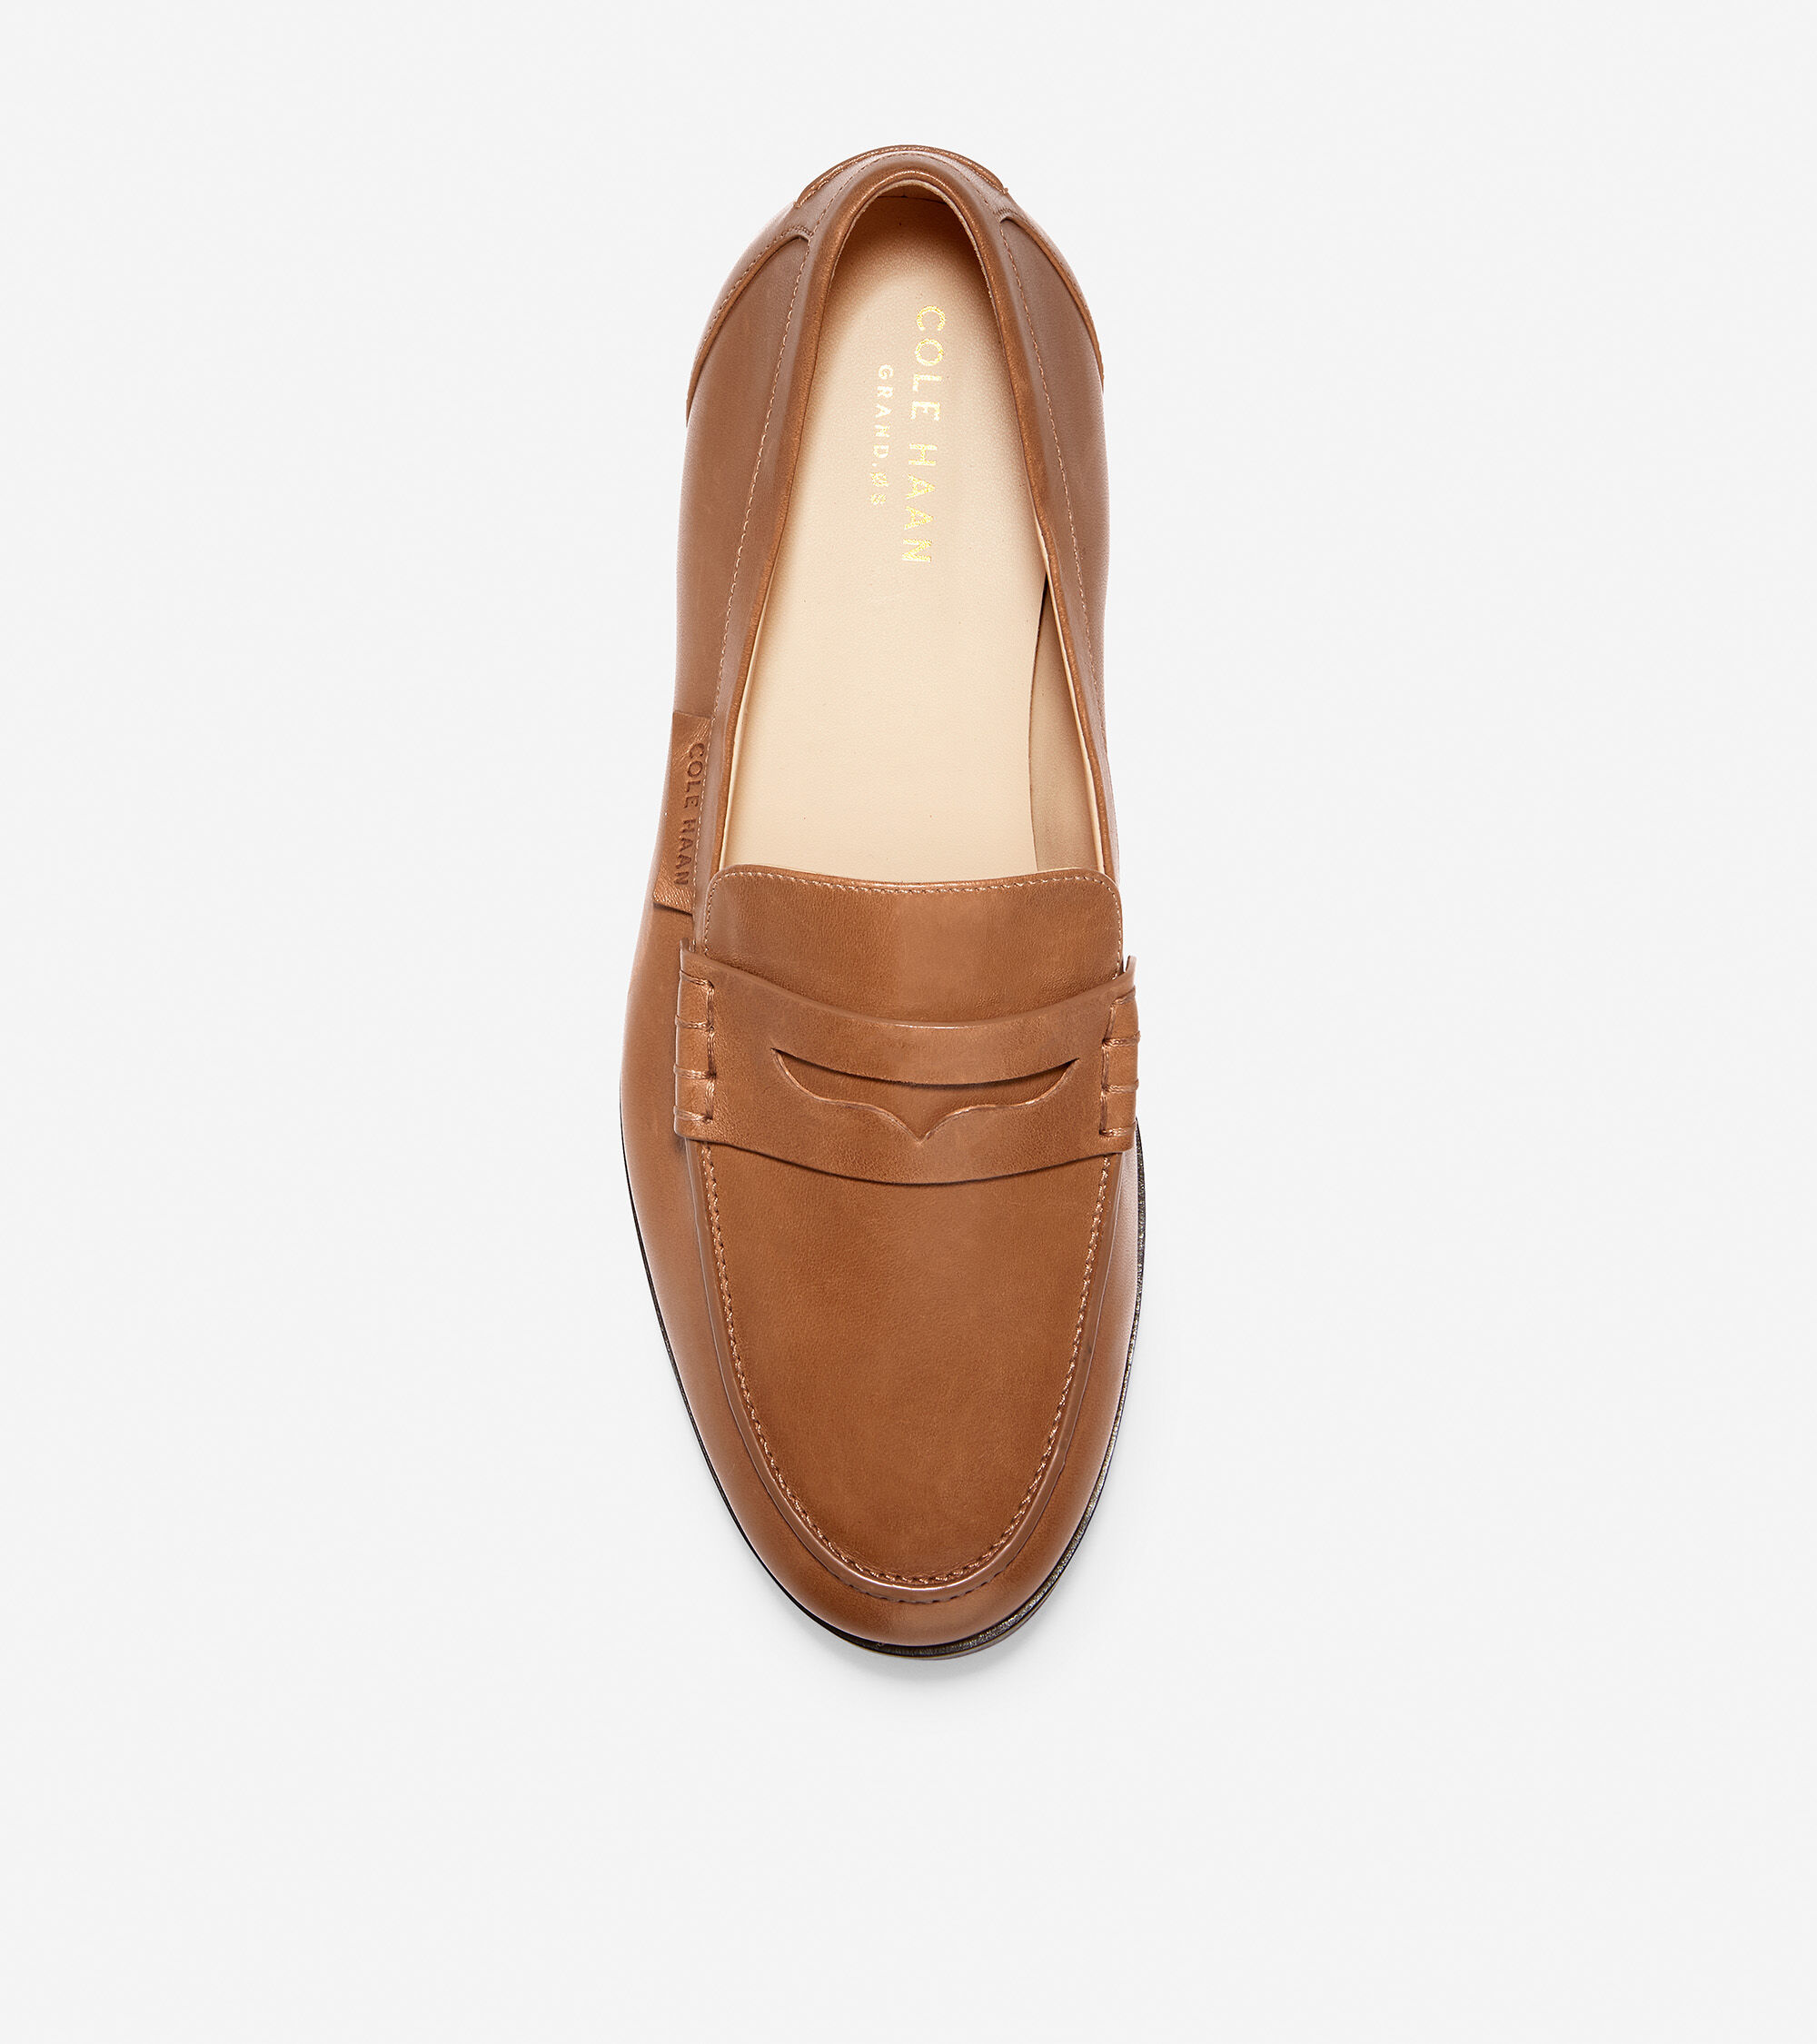 cole haan women's loafers